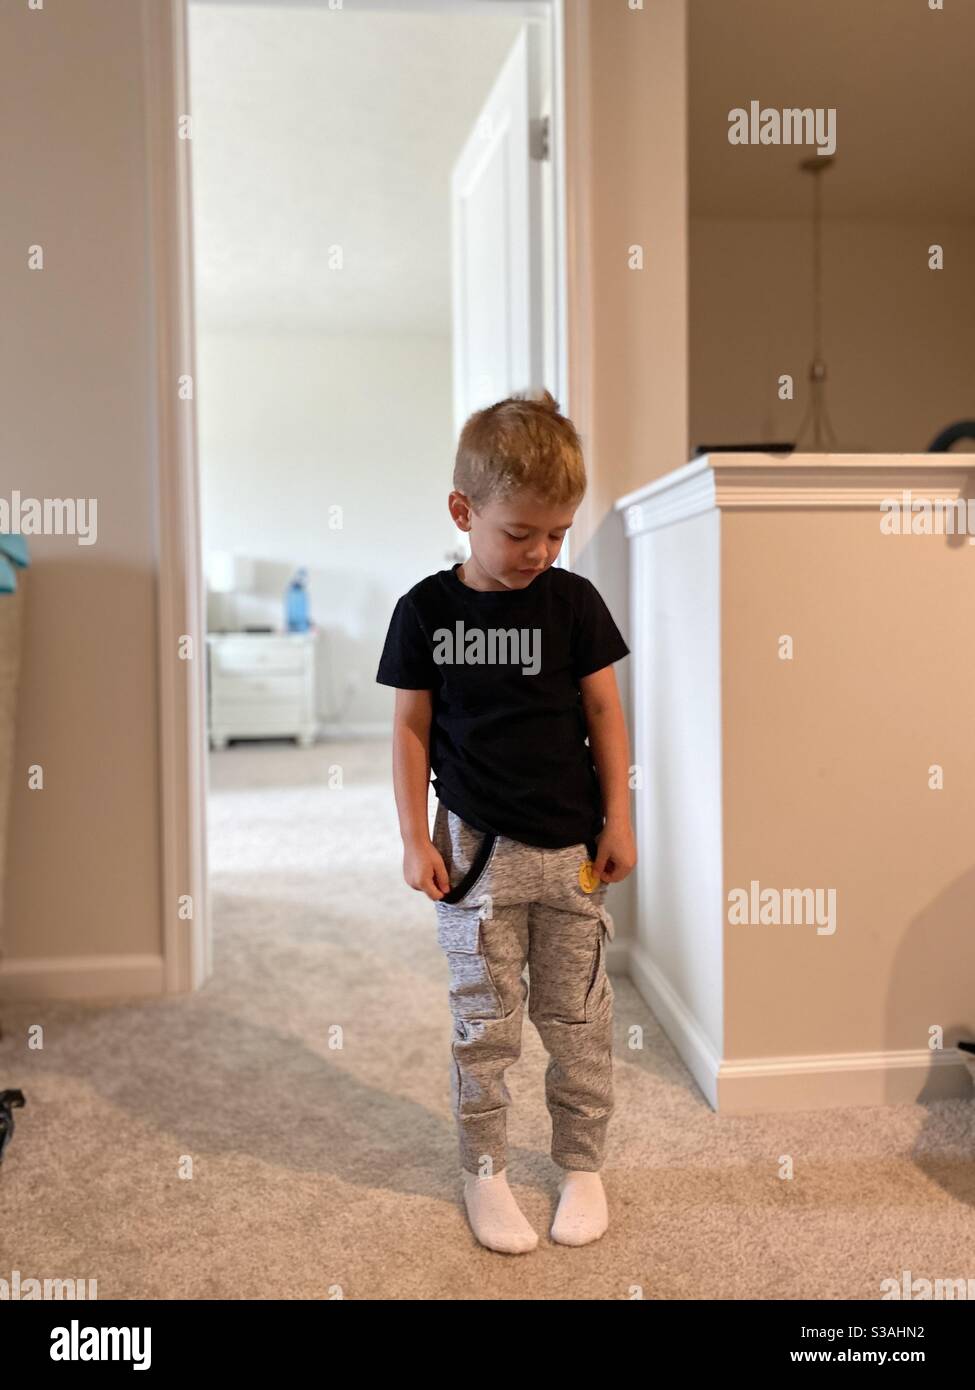 Blonde boy dressed up in grey sweats and black shirt, all ready for the busy day planned ahead Stock Photo